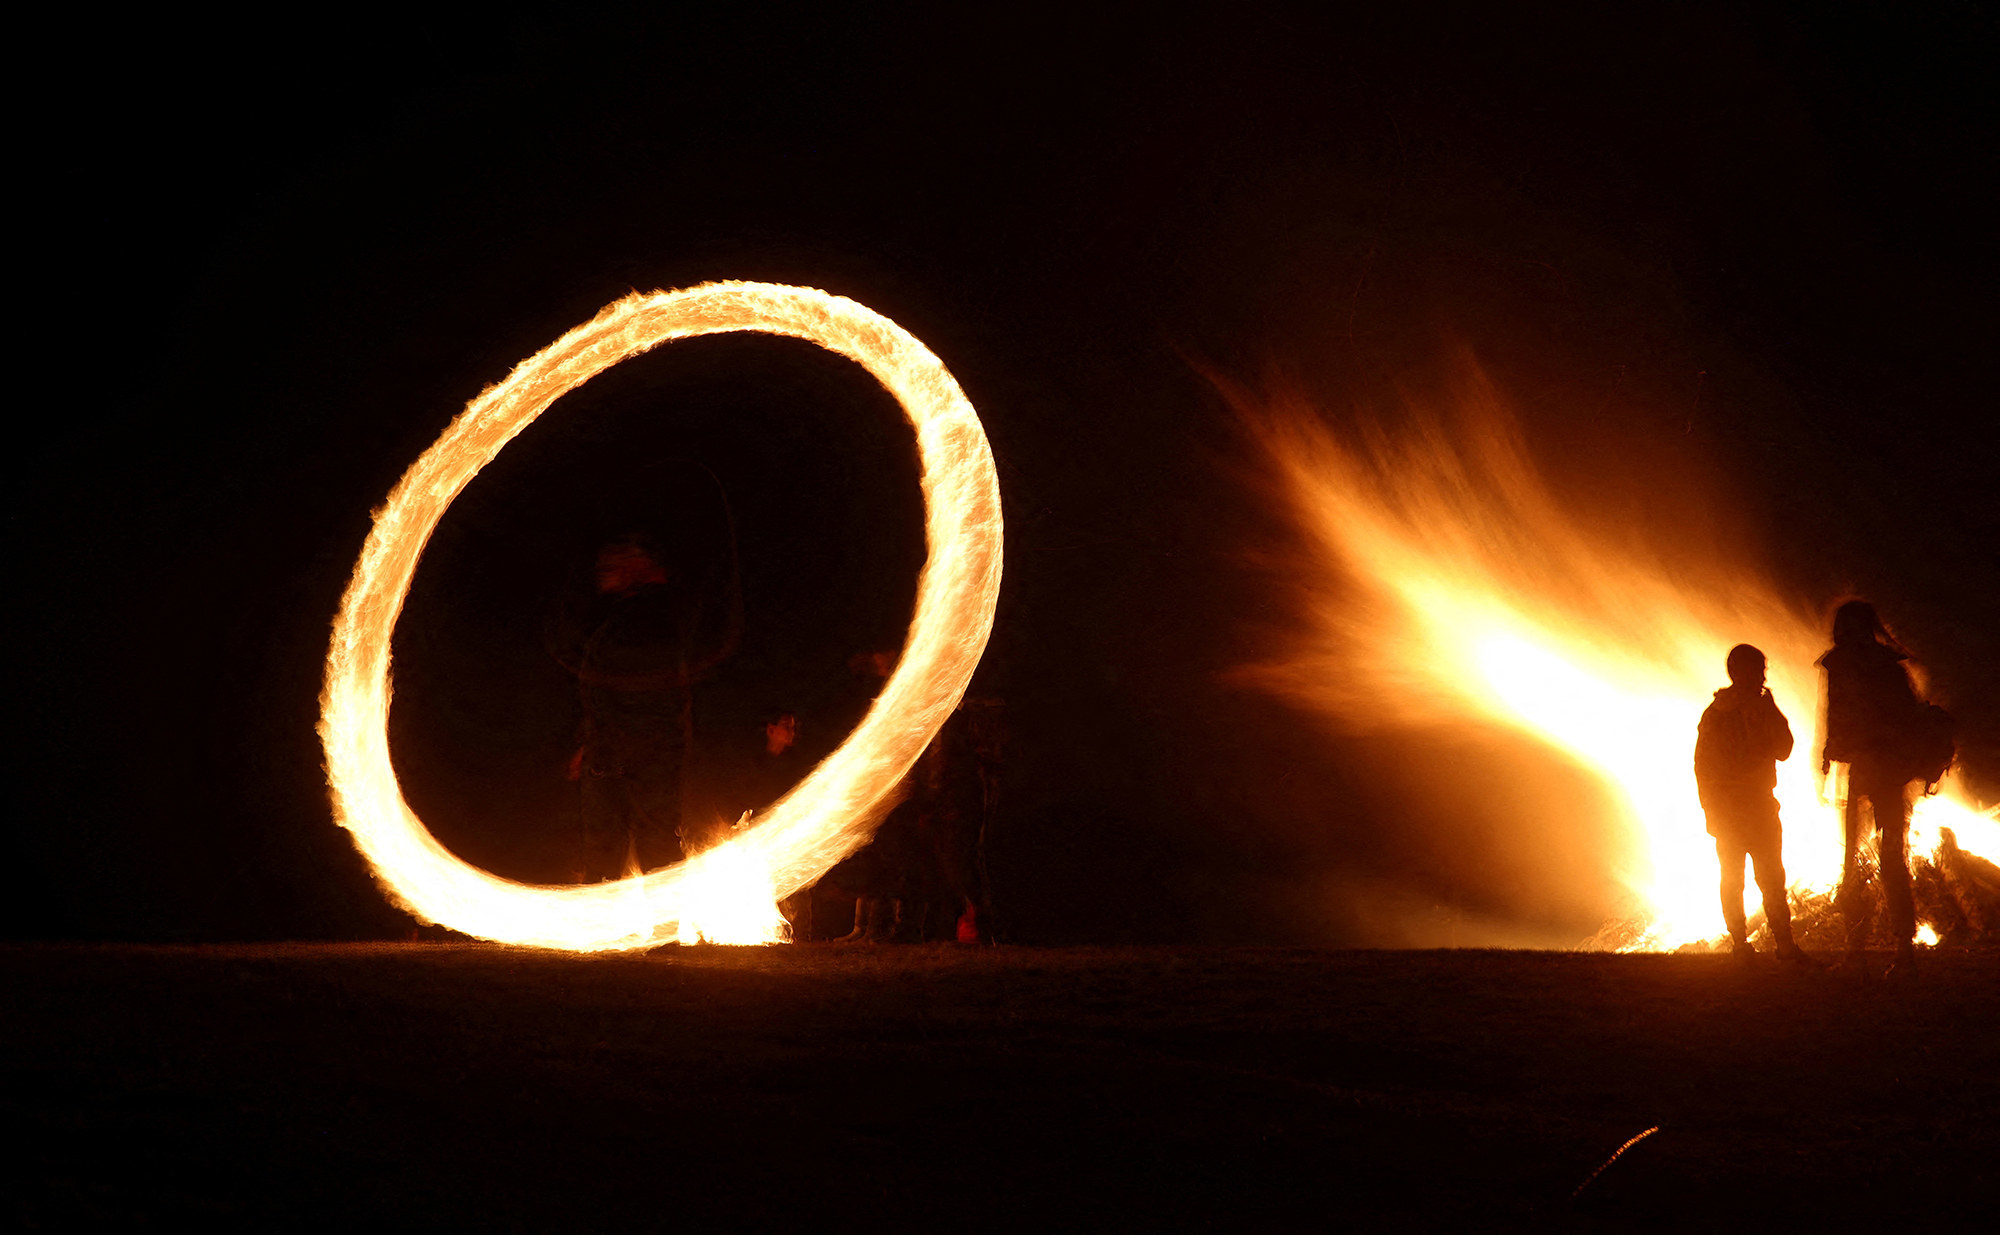 a gigantic ring of fire spins at night while two children look on